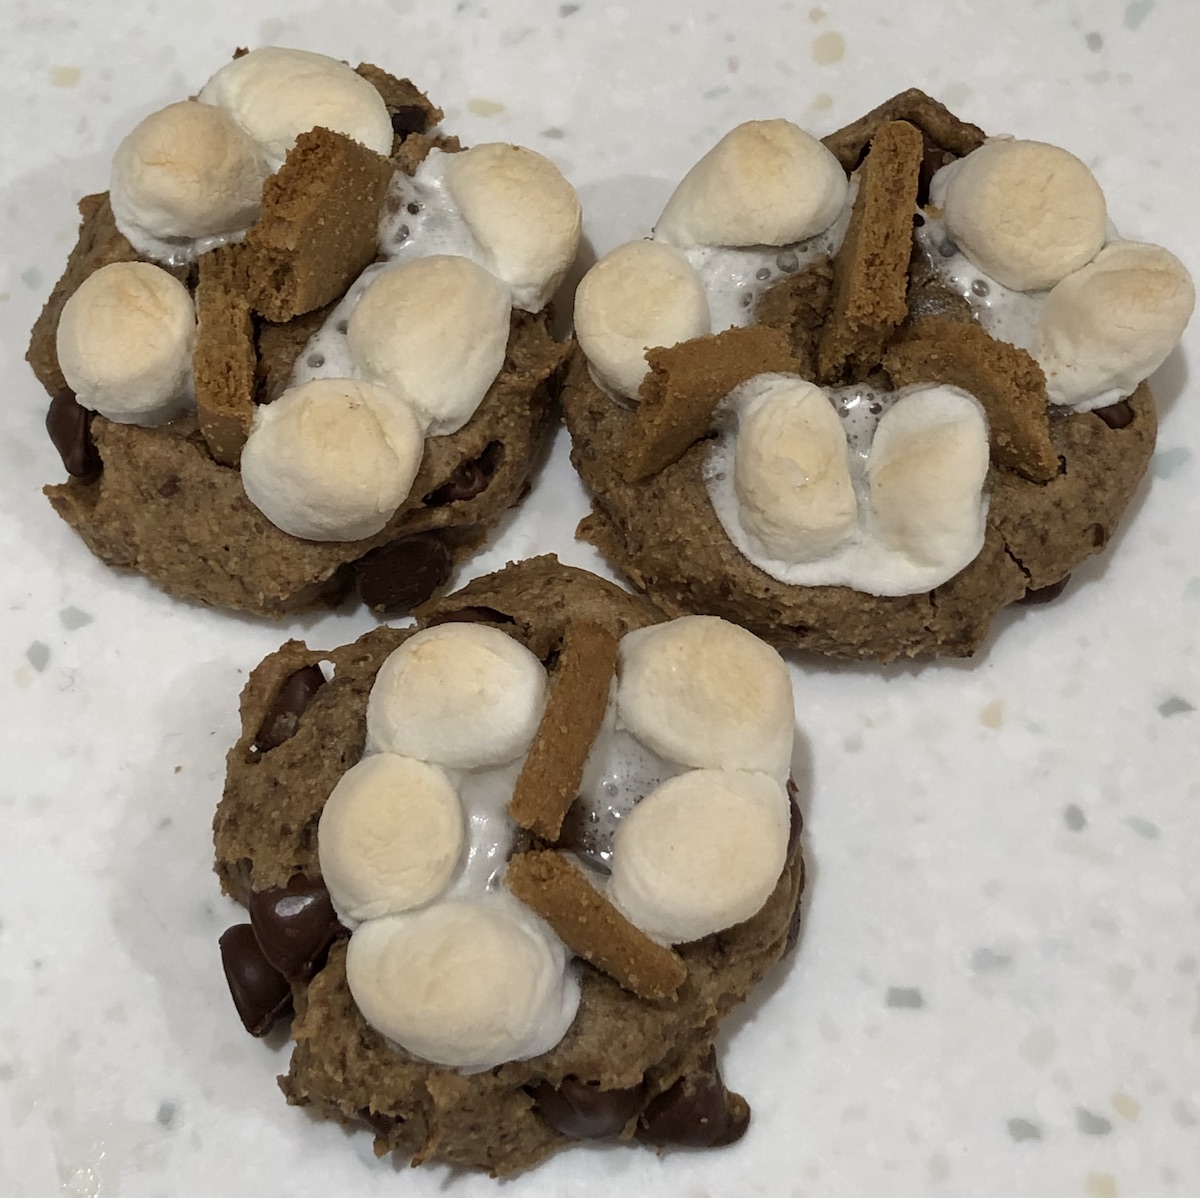 Three vegan s'mores cookies with mini marshmallows toasted on top sitting on a white speckled counter.